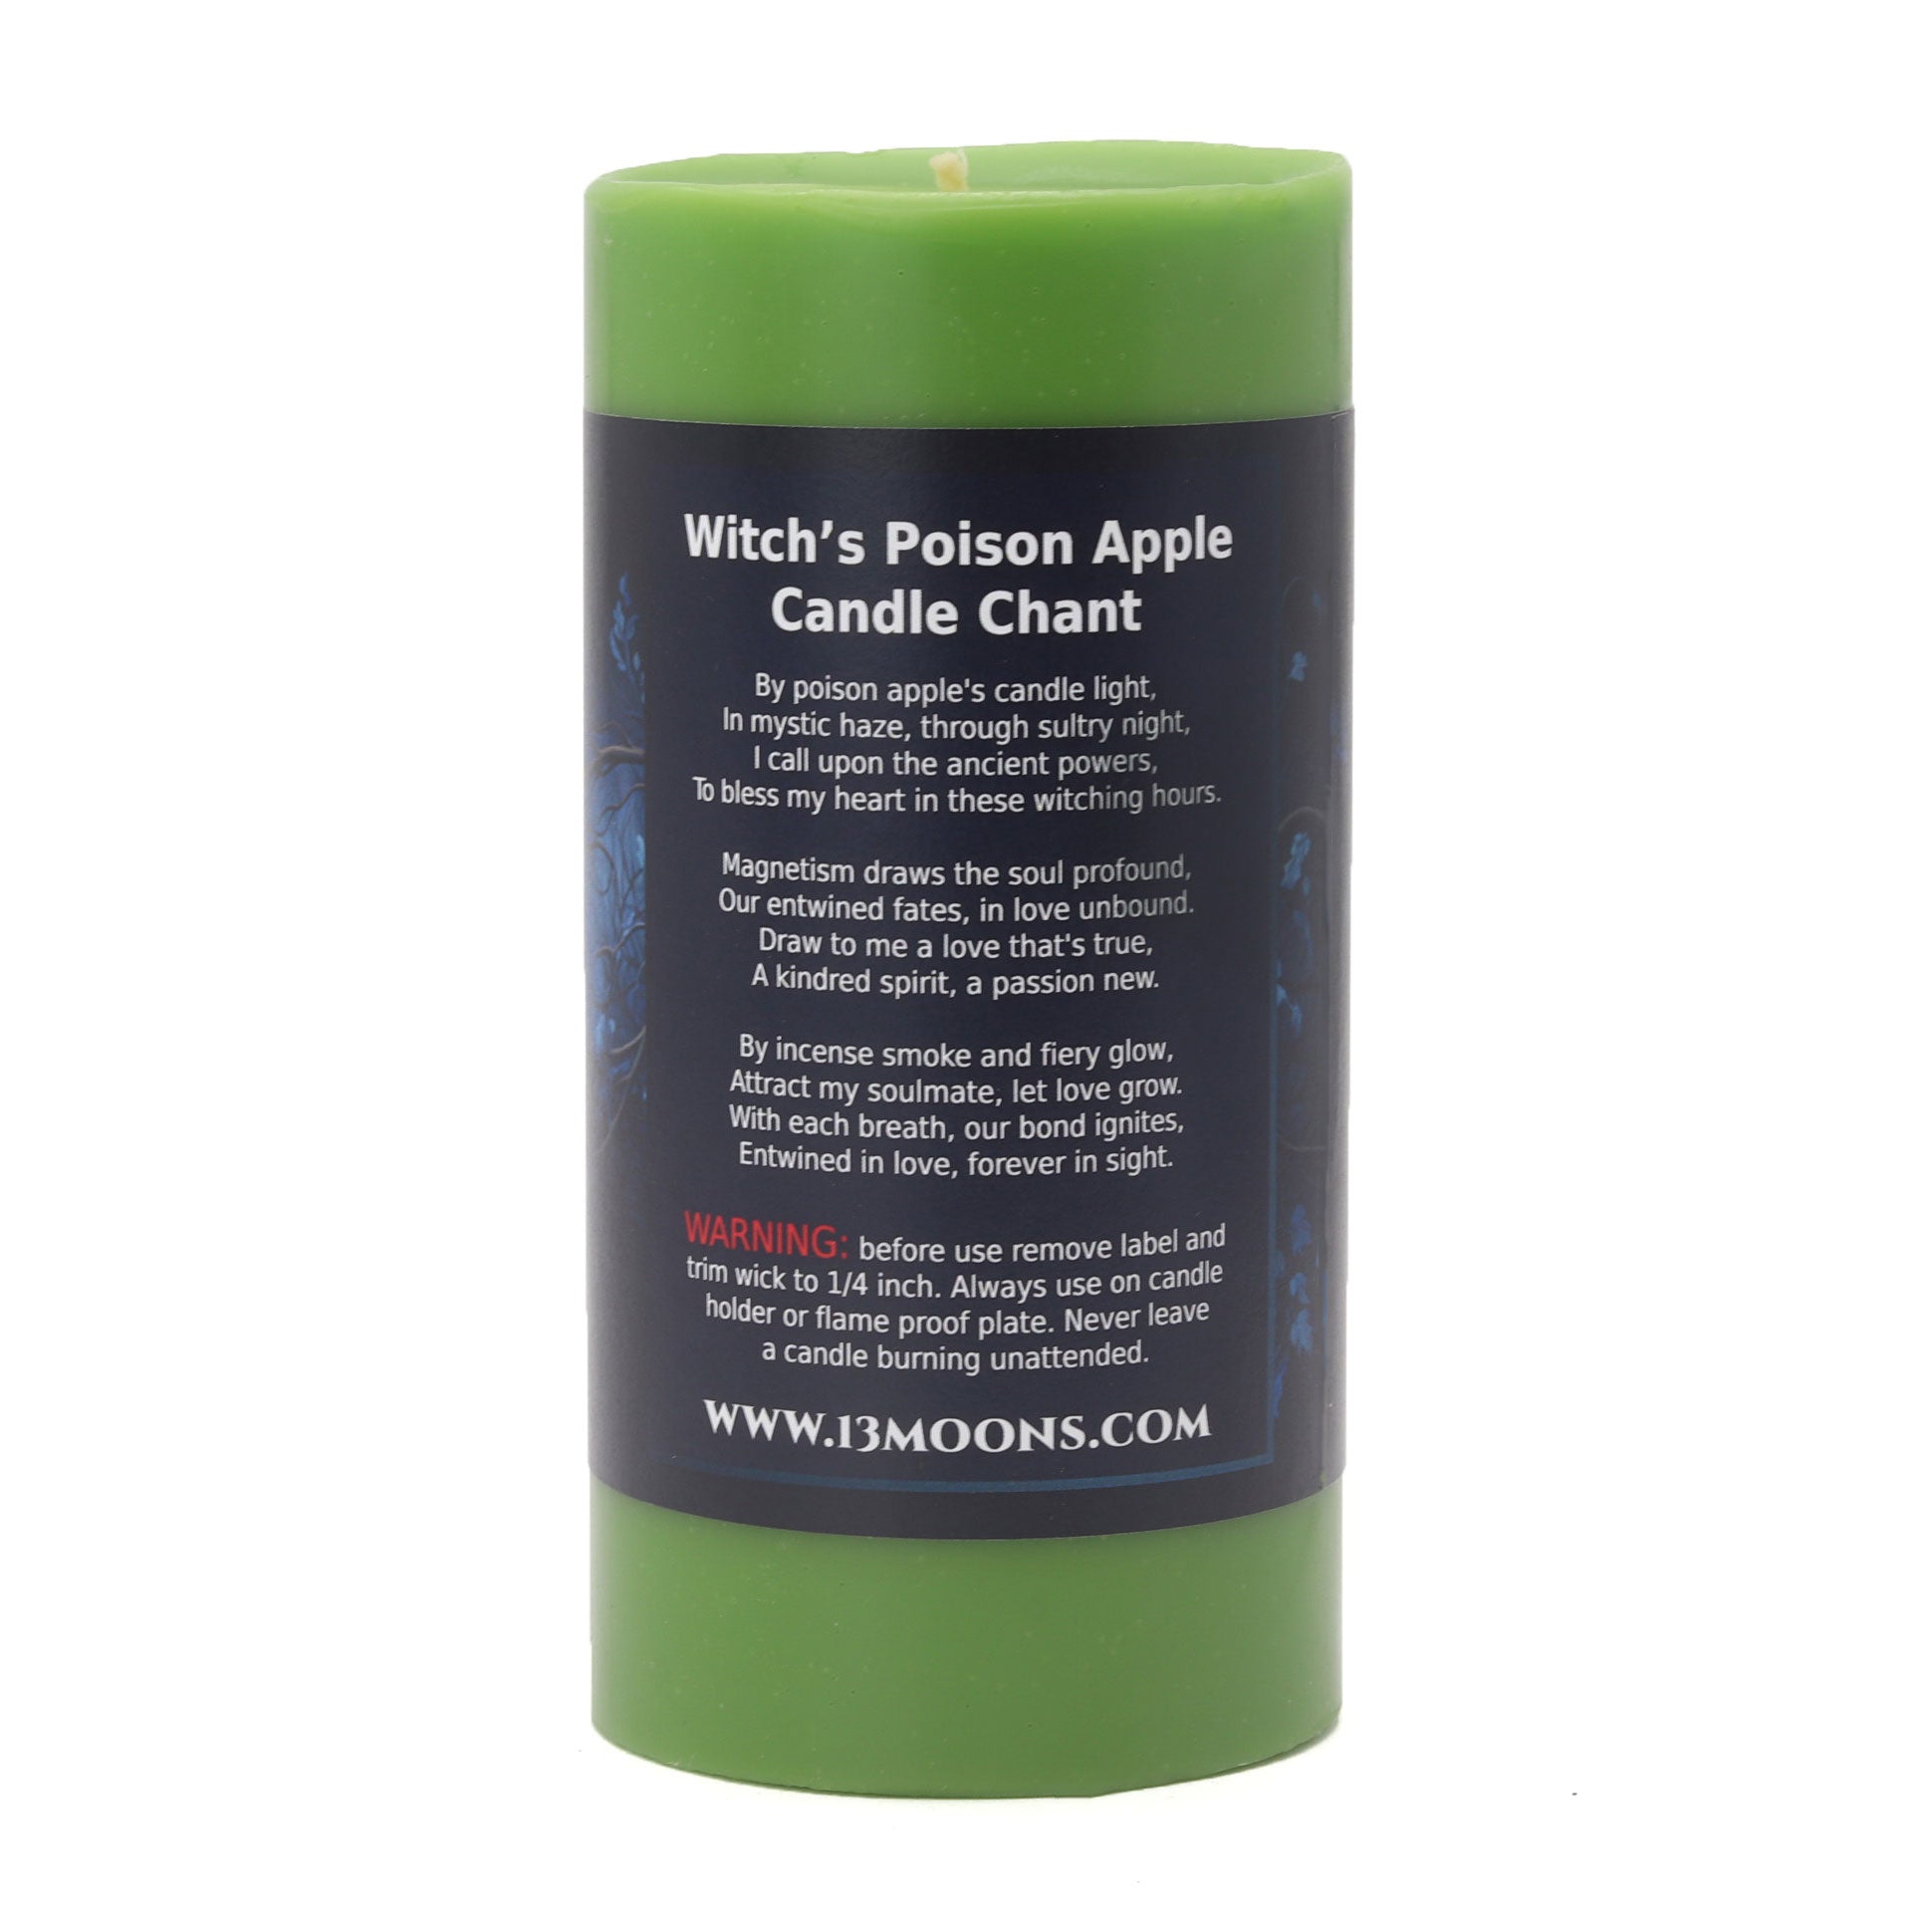 Witch's Poison Apple Ritual Candle - 13 Moons